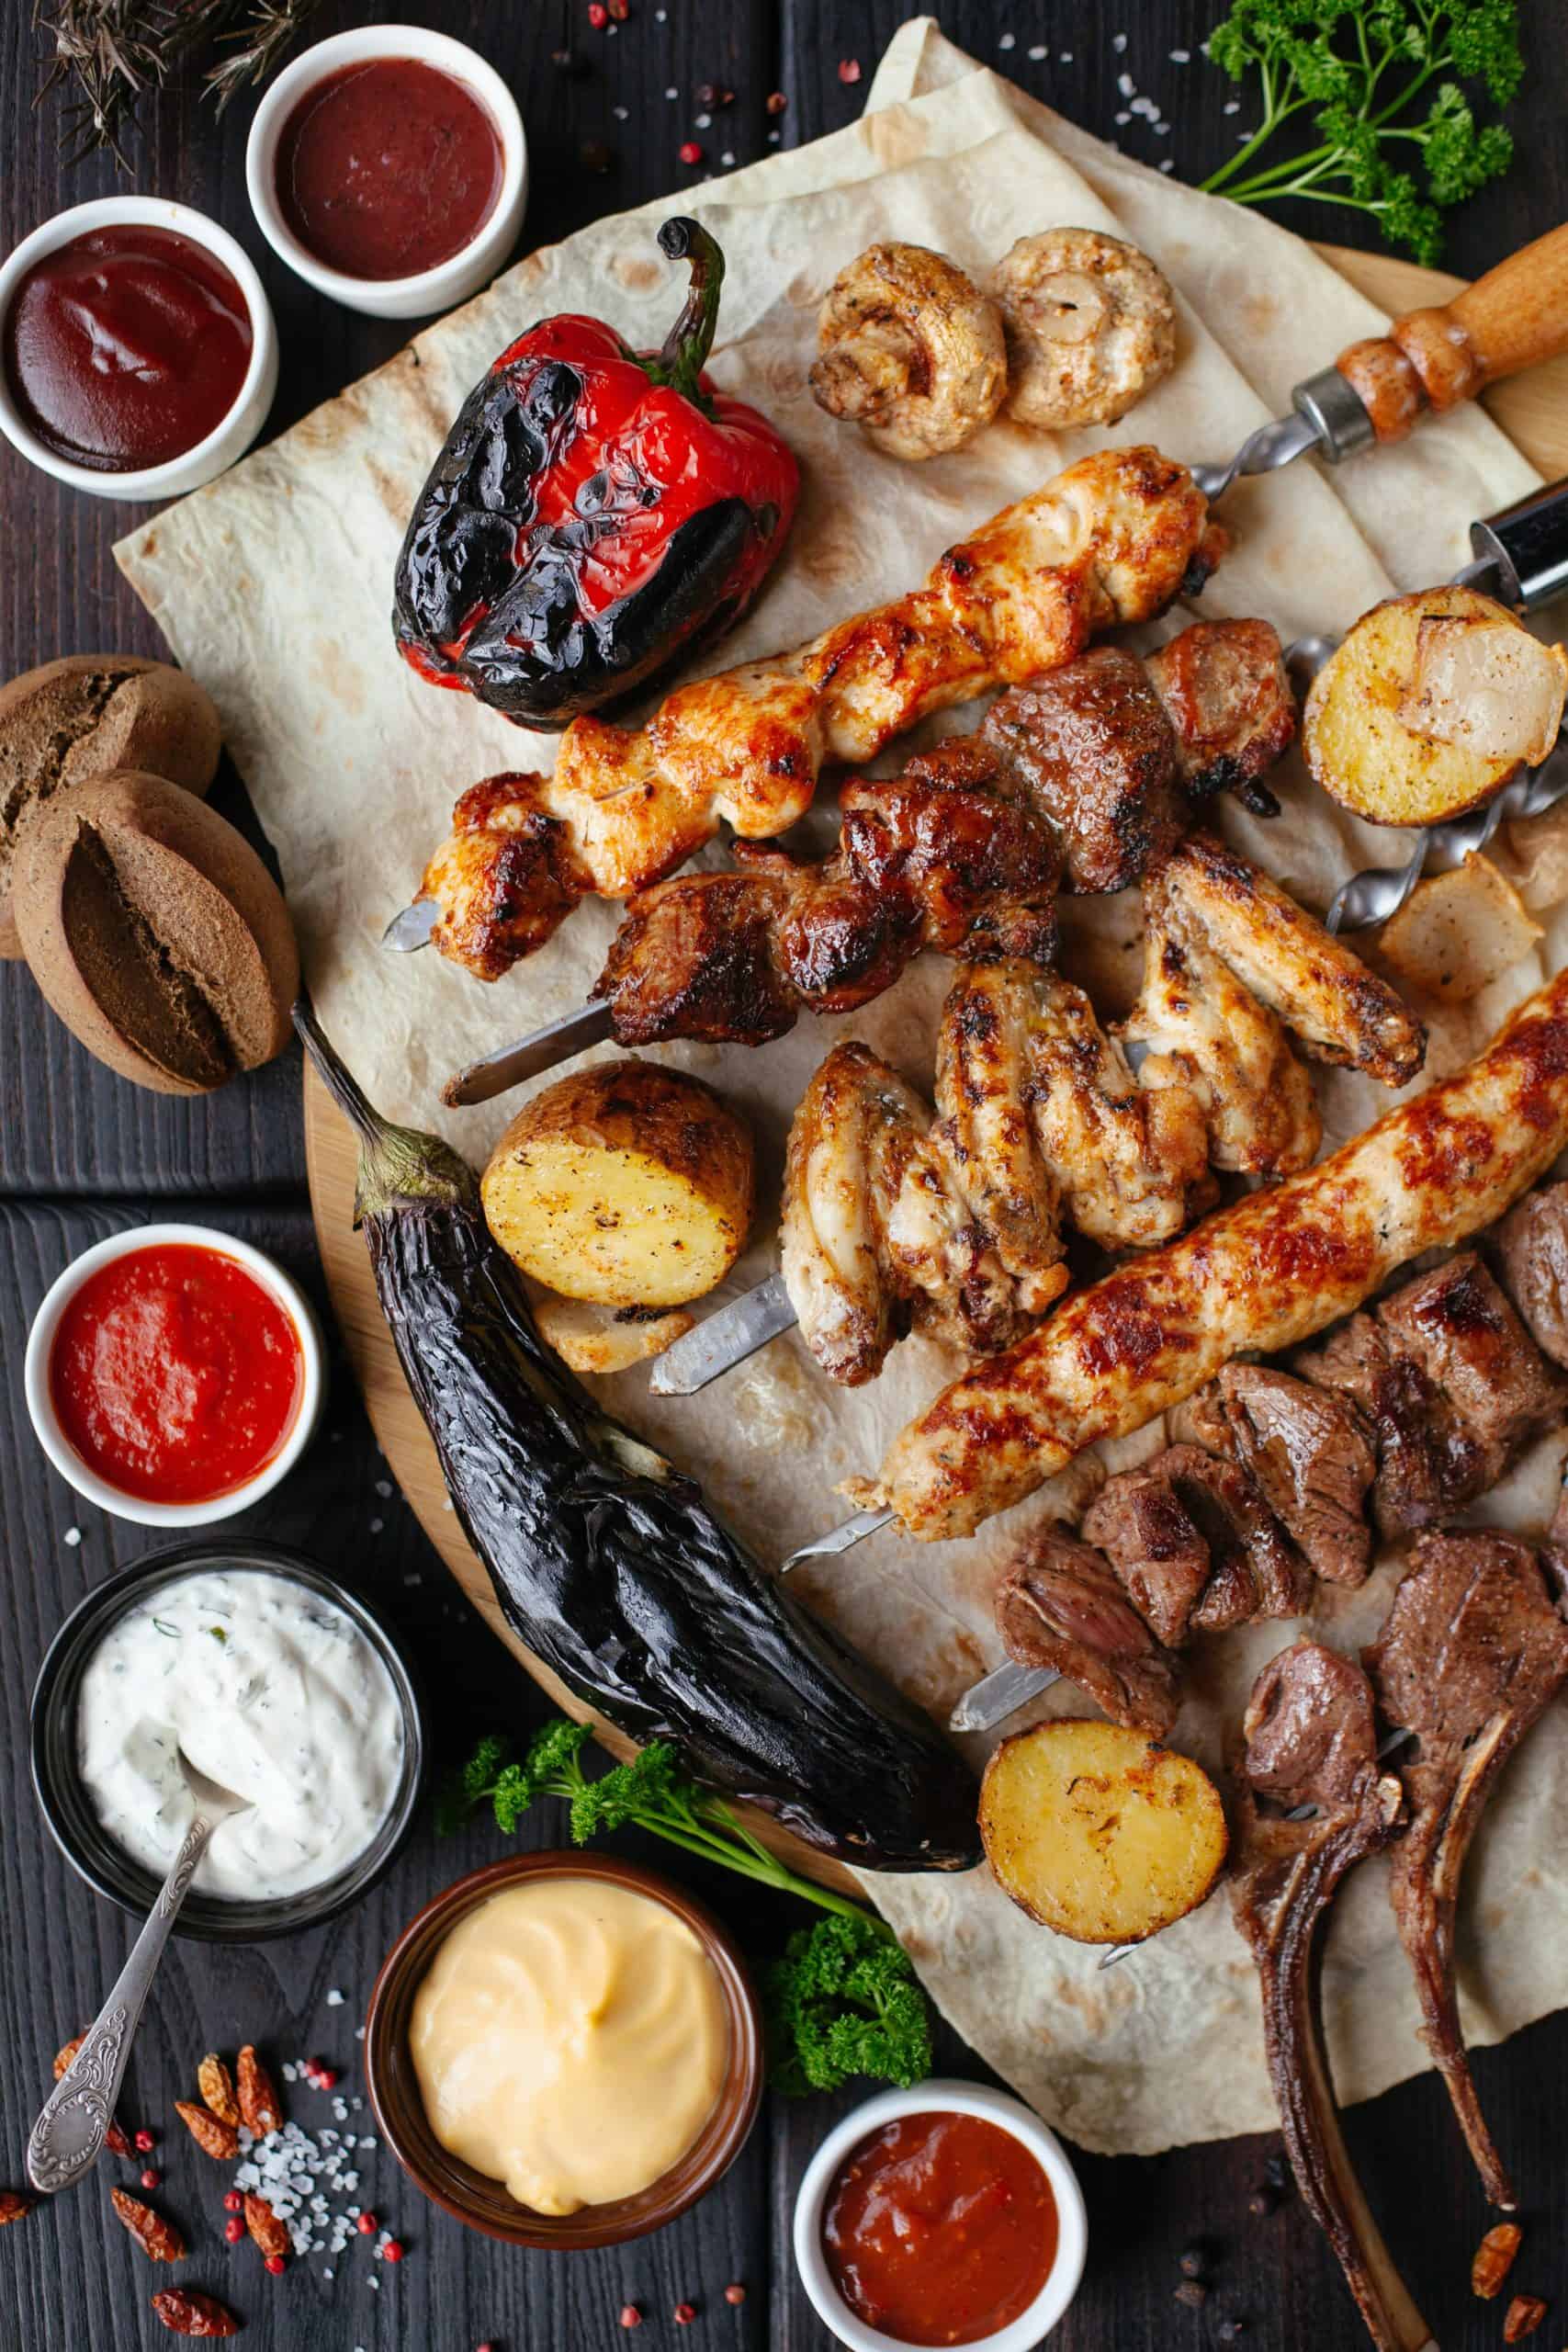 BBQ Tricks To Help You Become Expert in Barbecuing